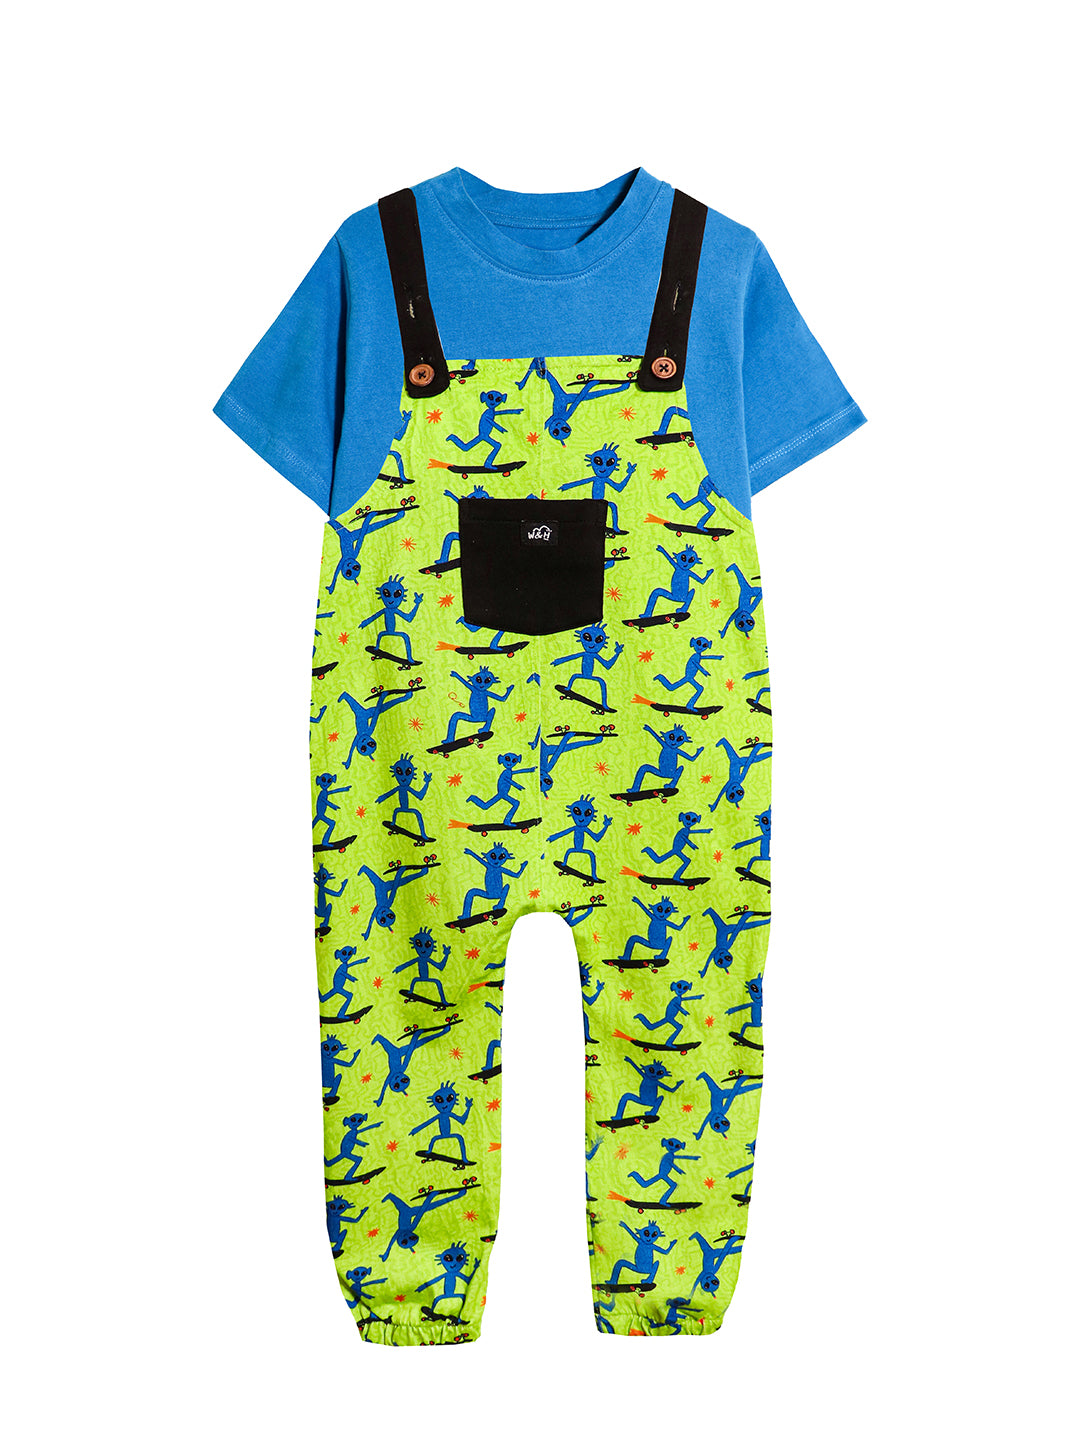 Alien Skater Cotton Dungaree with Blue T-shirt for Boys & Girls